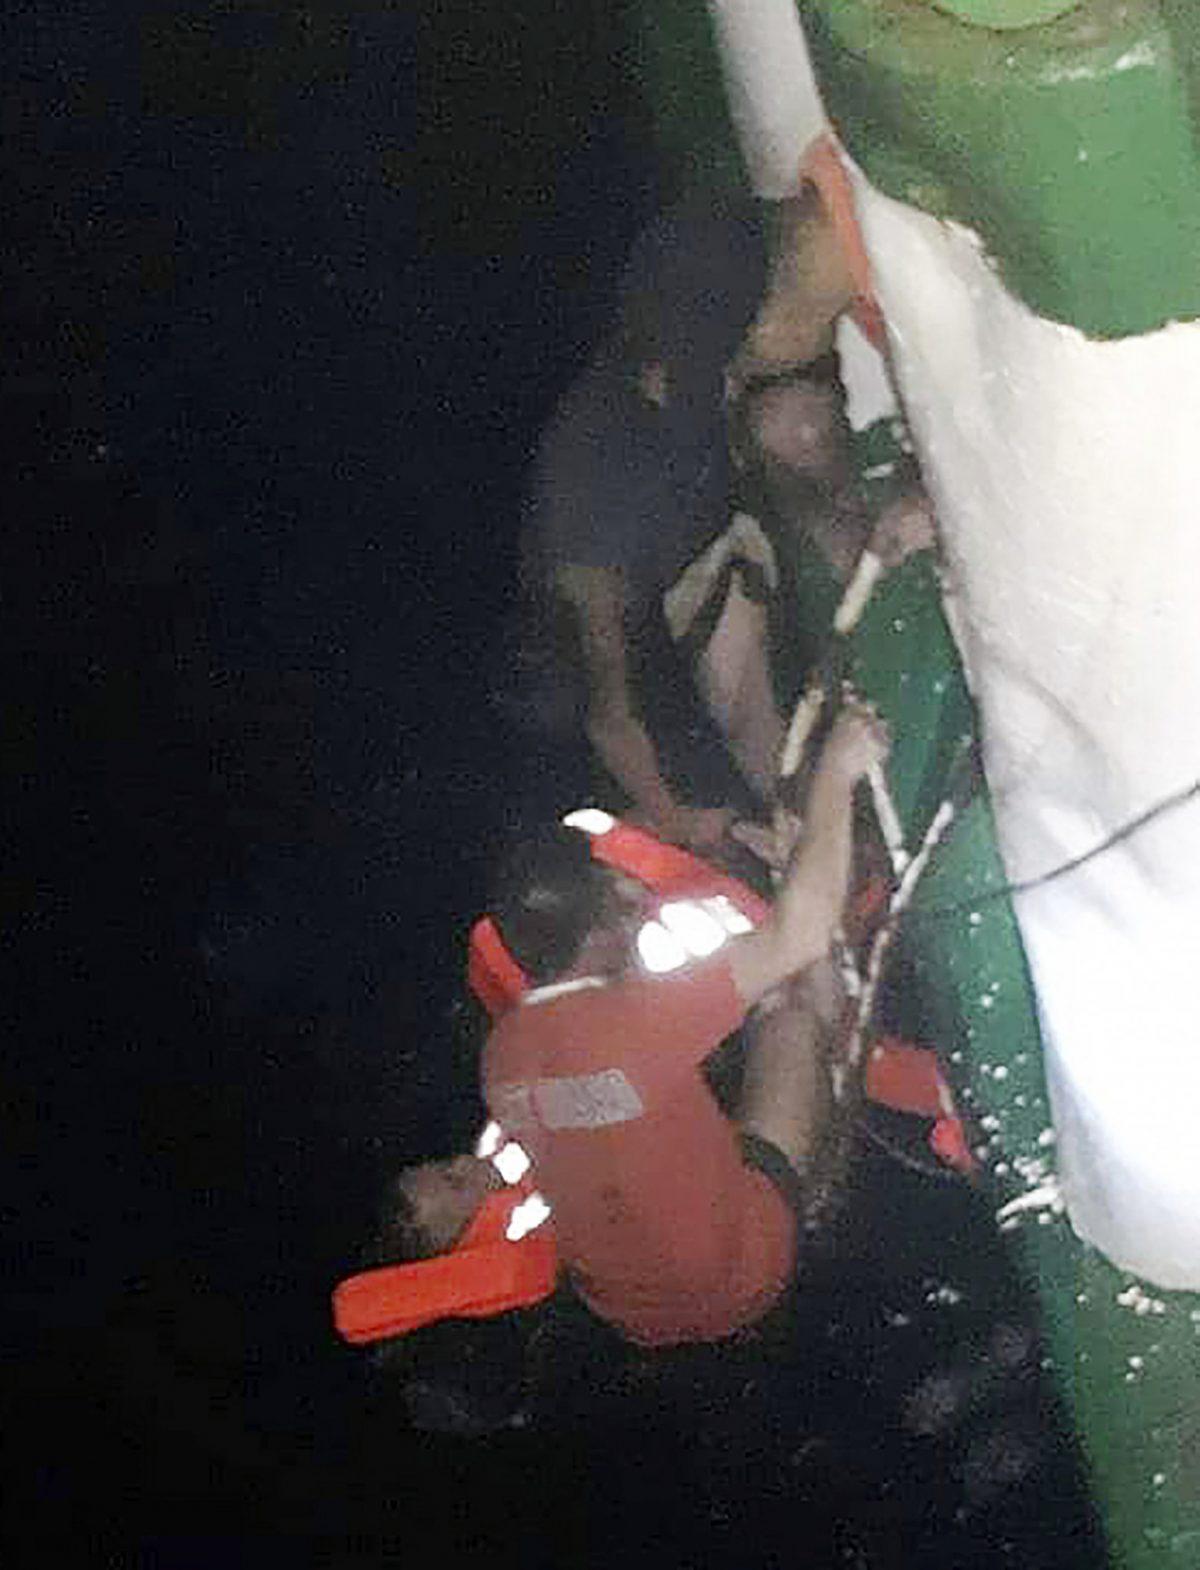 In this photo provided by Philippine Coast Guard in Manila, passengers are rescued by Philippine Coast Guard rescuers and crew of responding vessels from the M/V Lite Ferry 16 which caught fire before dawn on Aug. 28, 2019 off Dapitan city in Zamboanga del Norte province in the southern Philippines. (Philippine Coast Guard via AP)